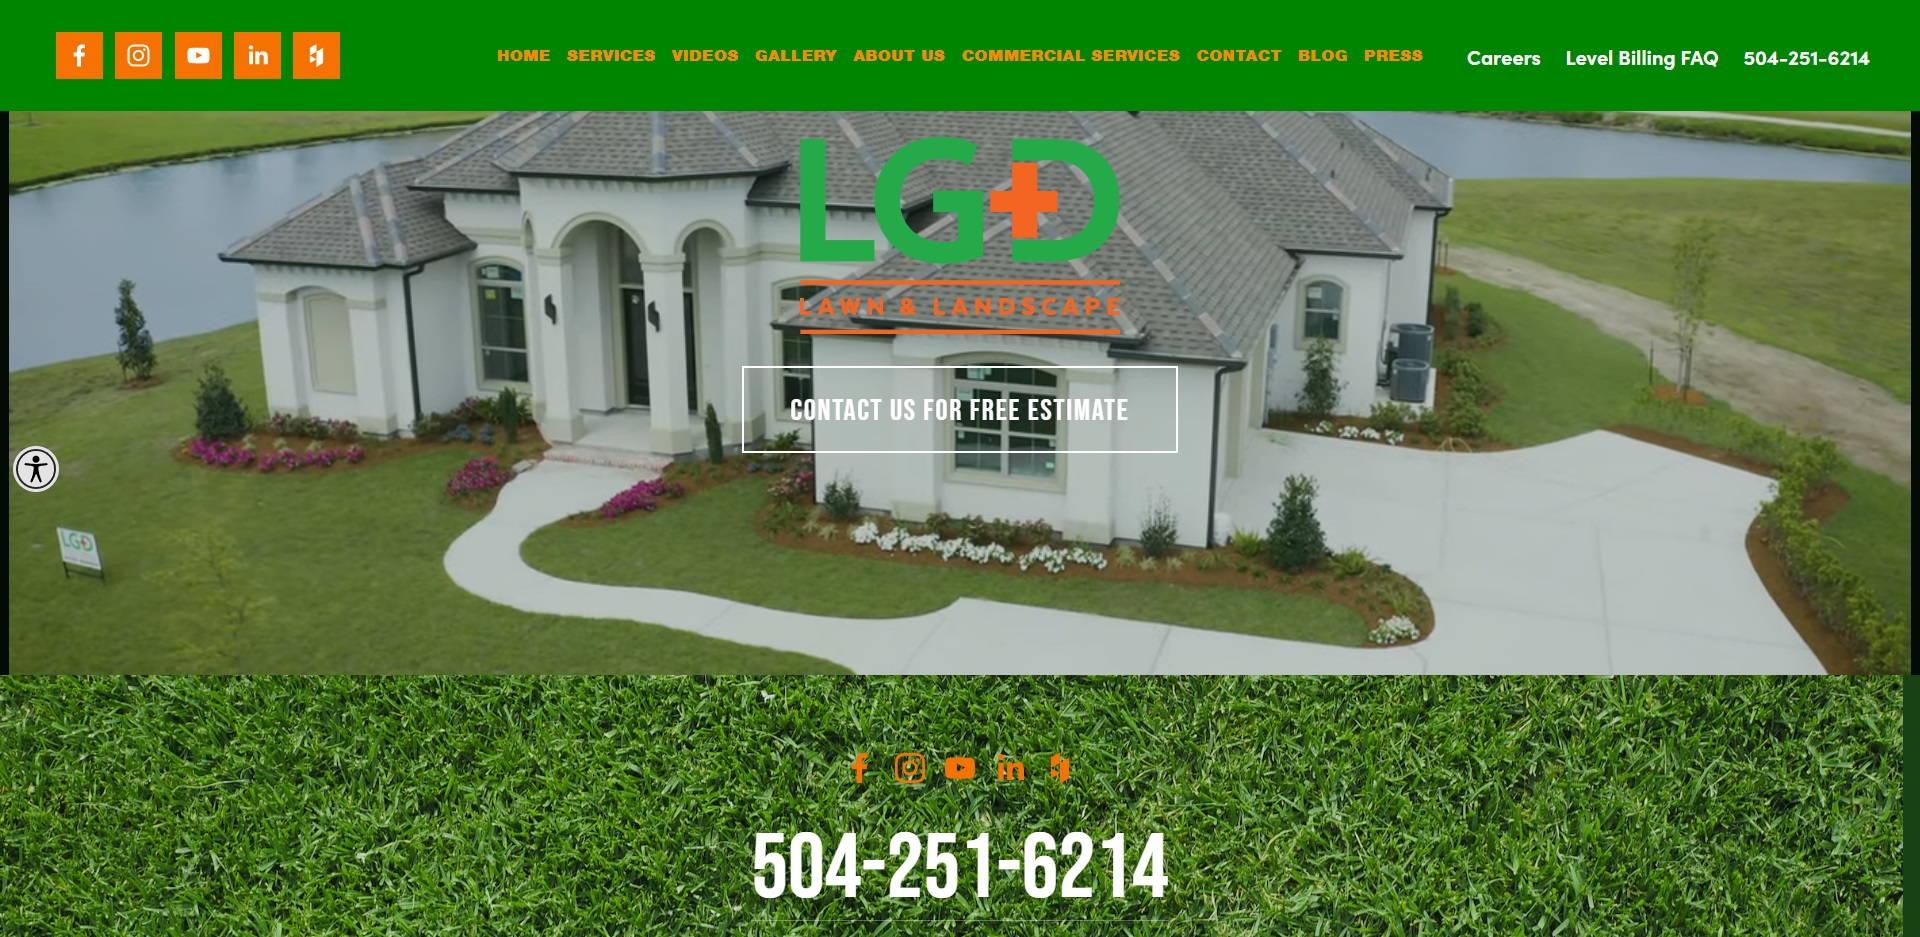 5 Best Landscaping Companies in New Orleans, LA